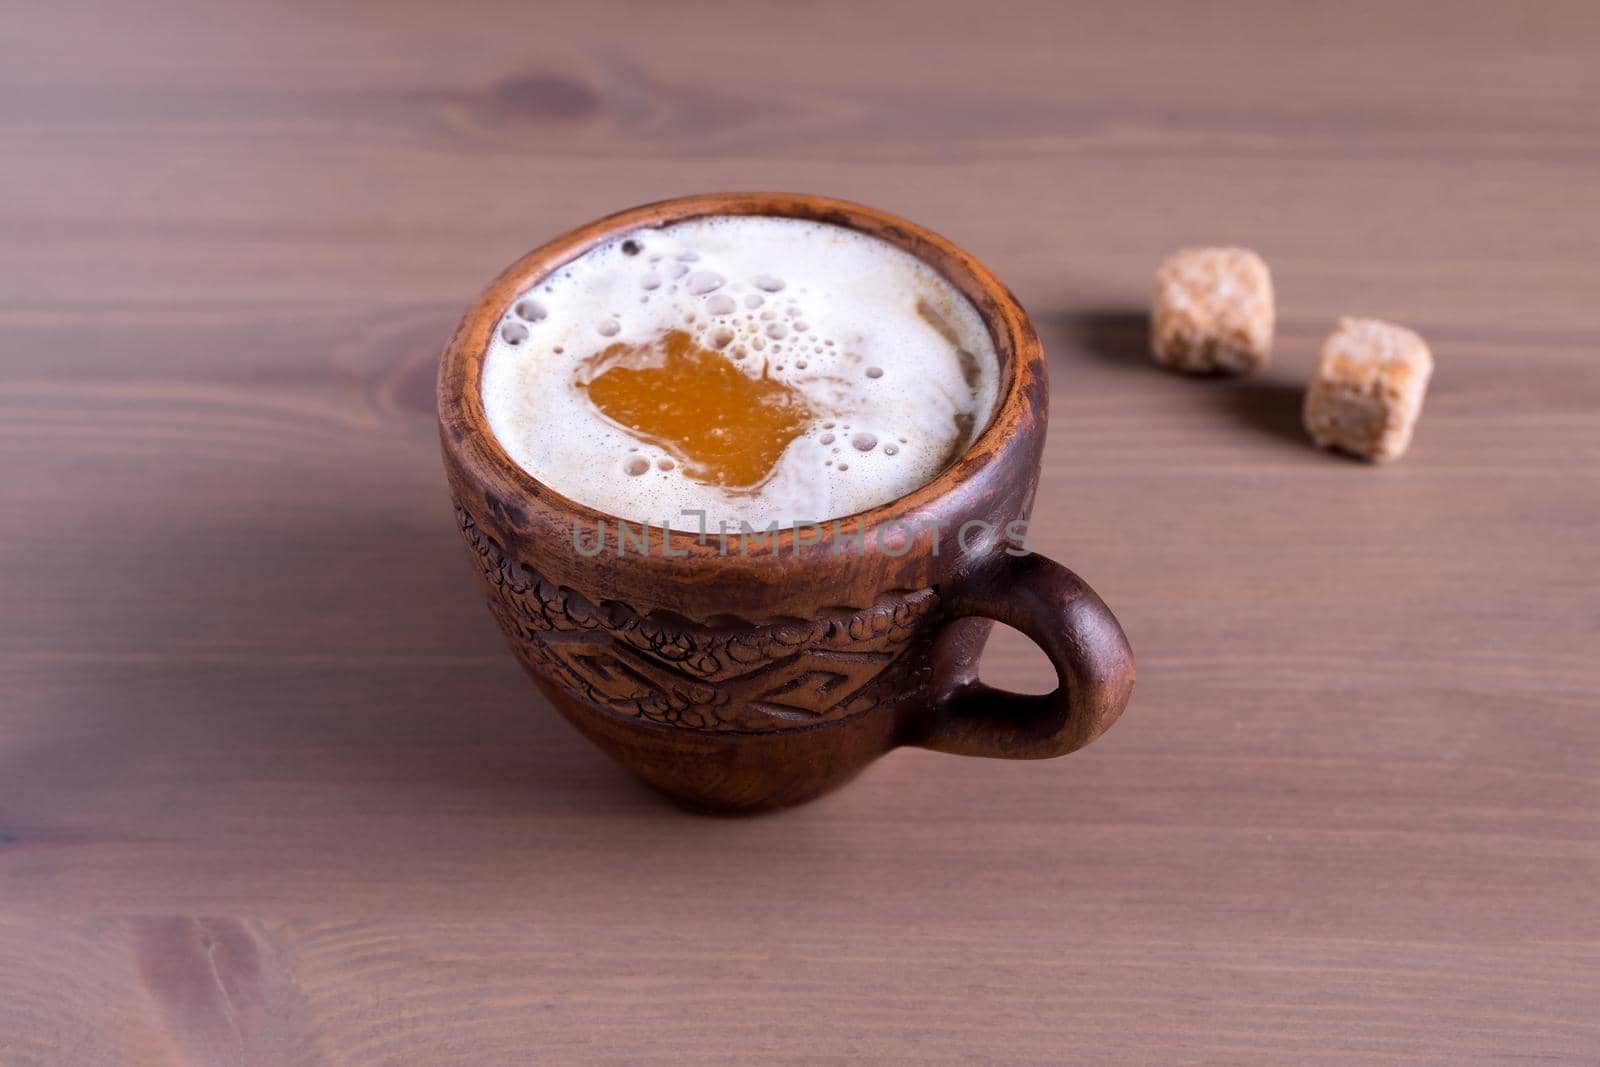 Close-up of hot coffee with milk in a fired earthenware mug with cane sugar pieces. Natural wood background.